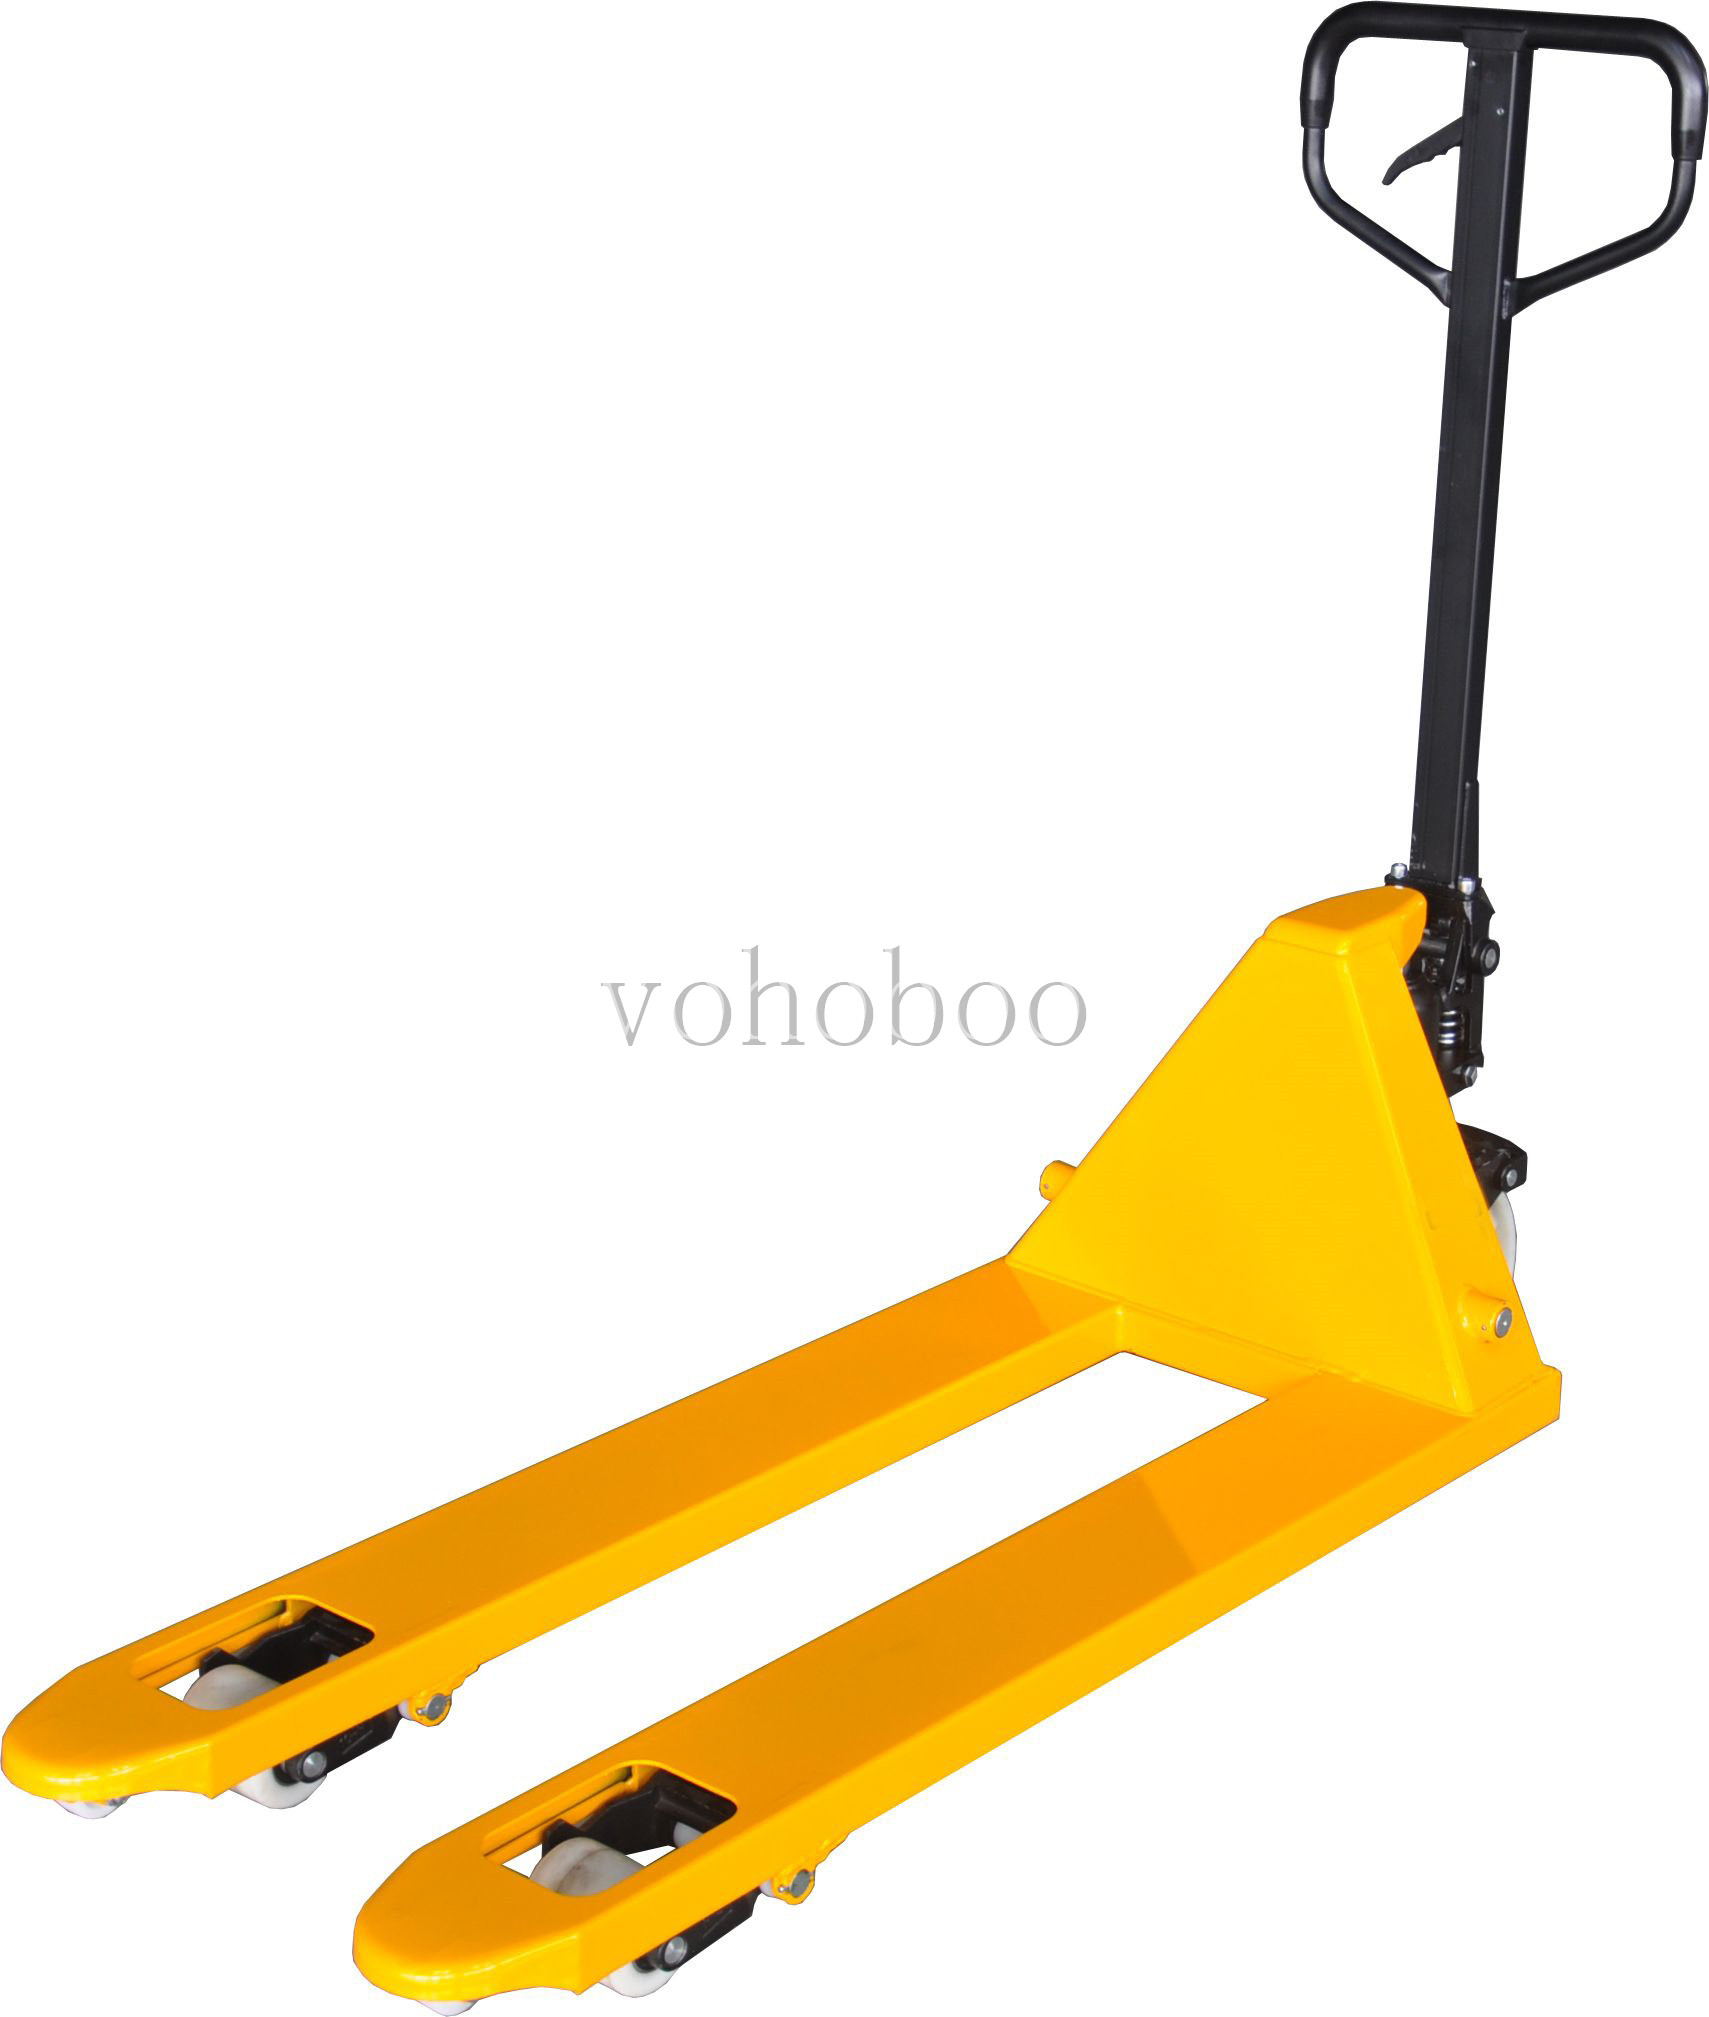 High Quality Industrial Manual Pallet Truck